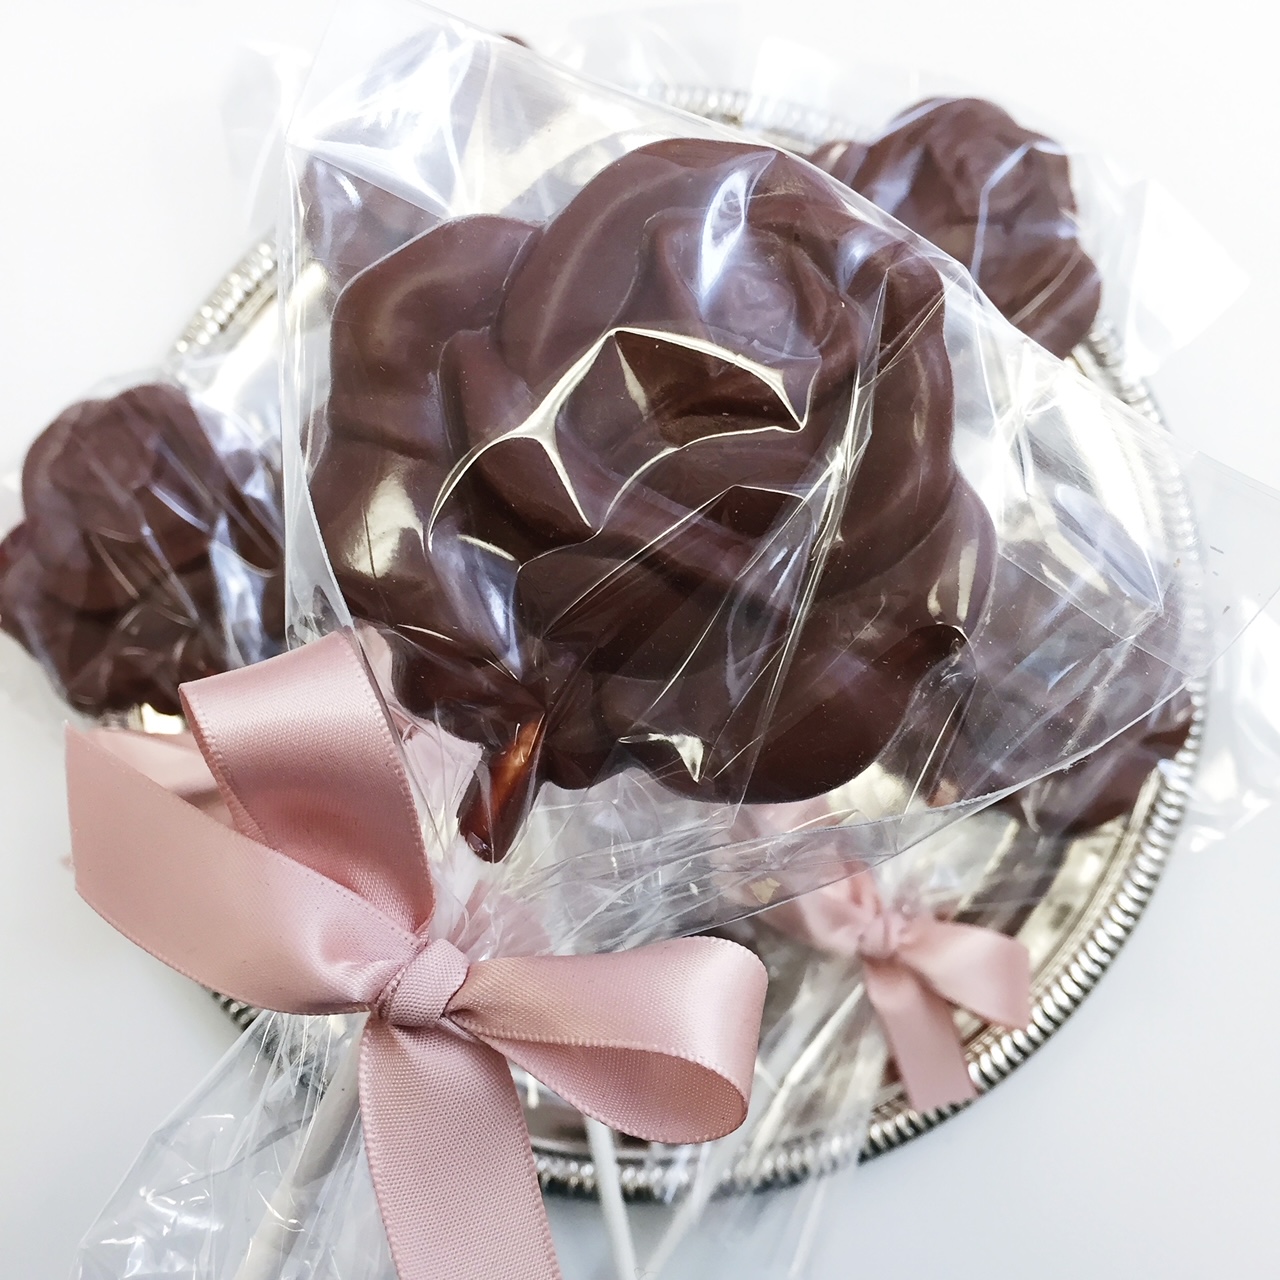 Sample Image of Edible Favour 015